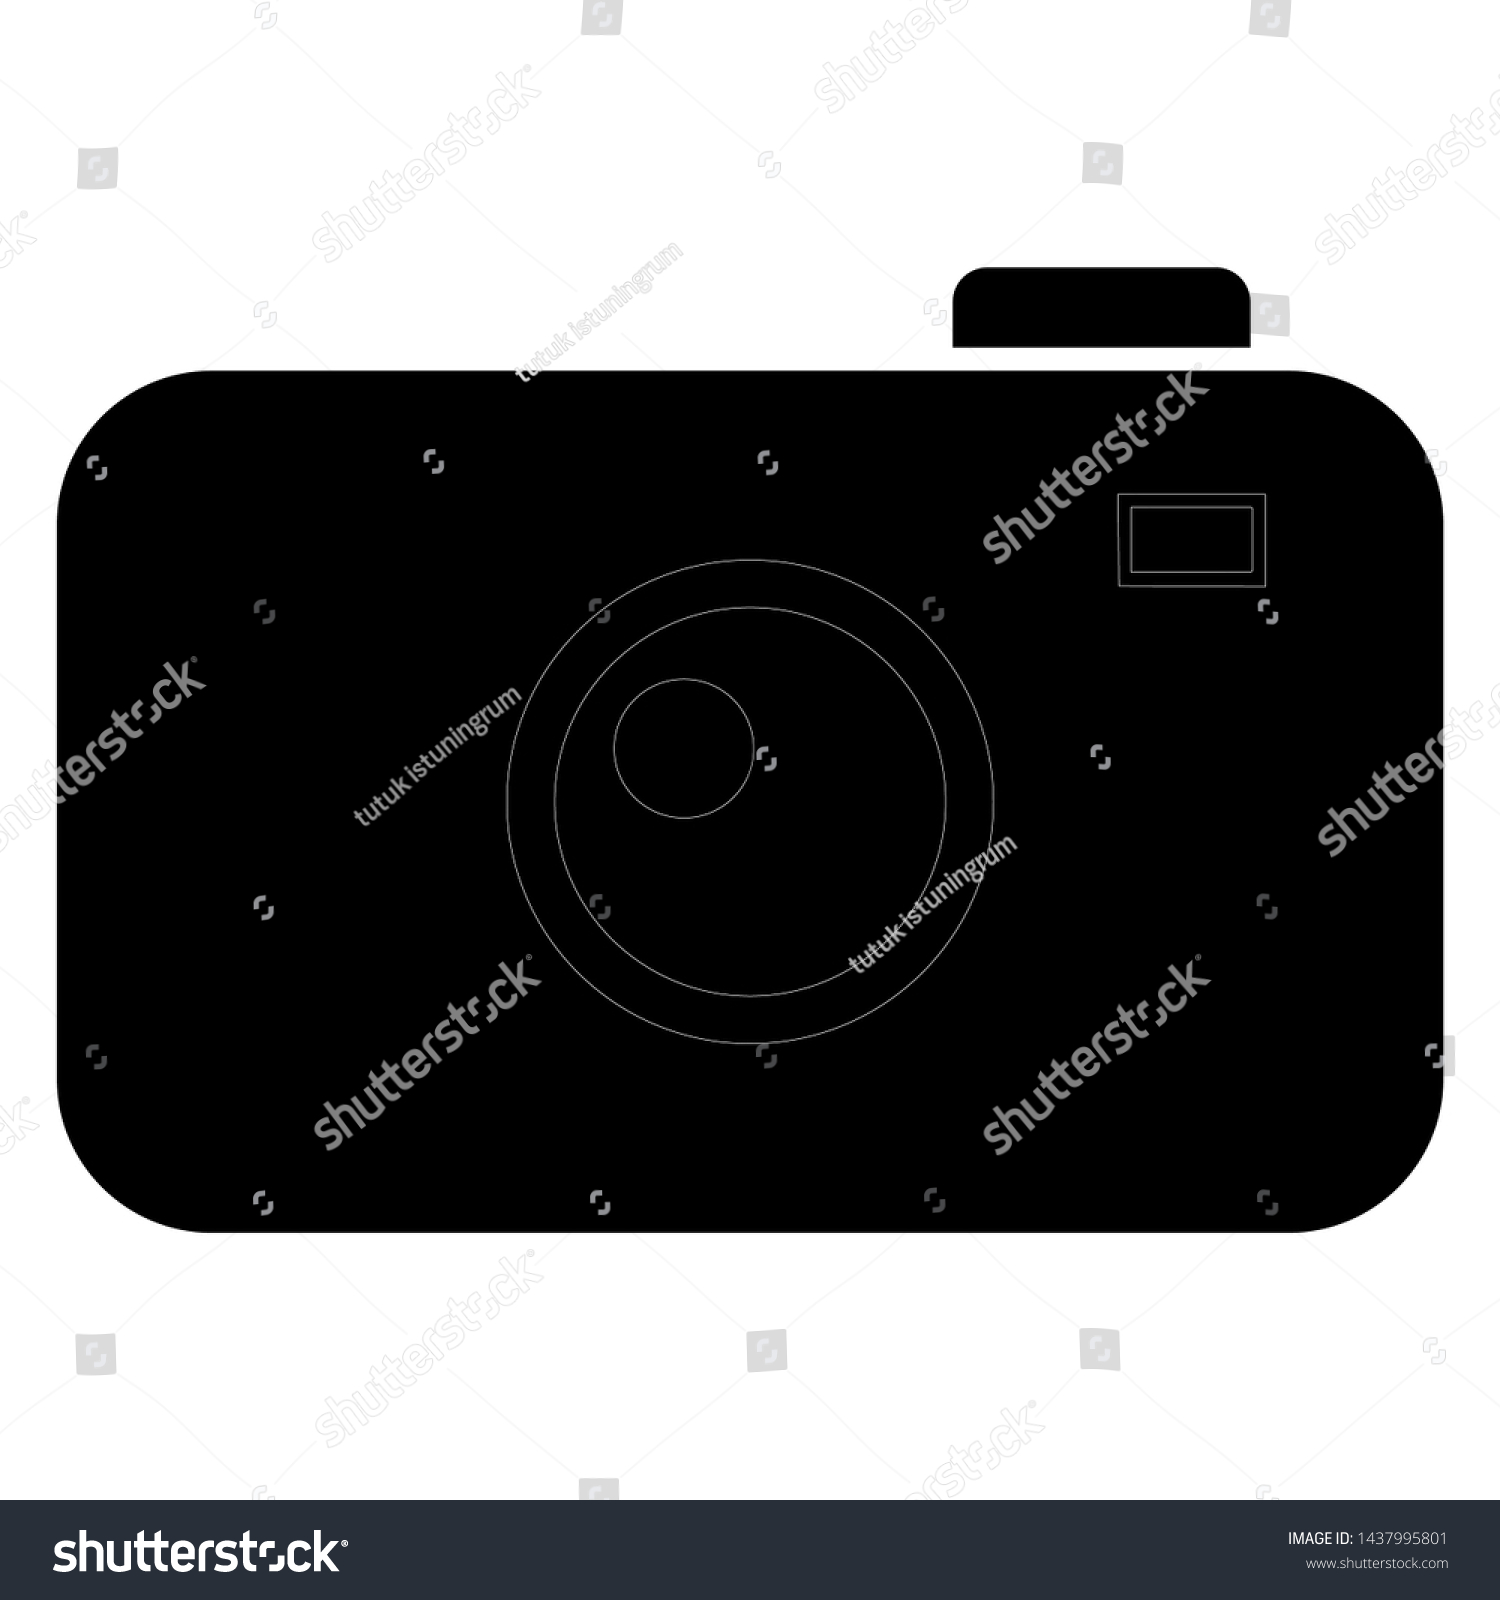 camera tool for photographing objects or objects #1437995801